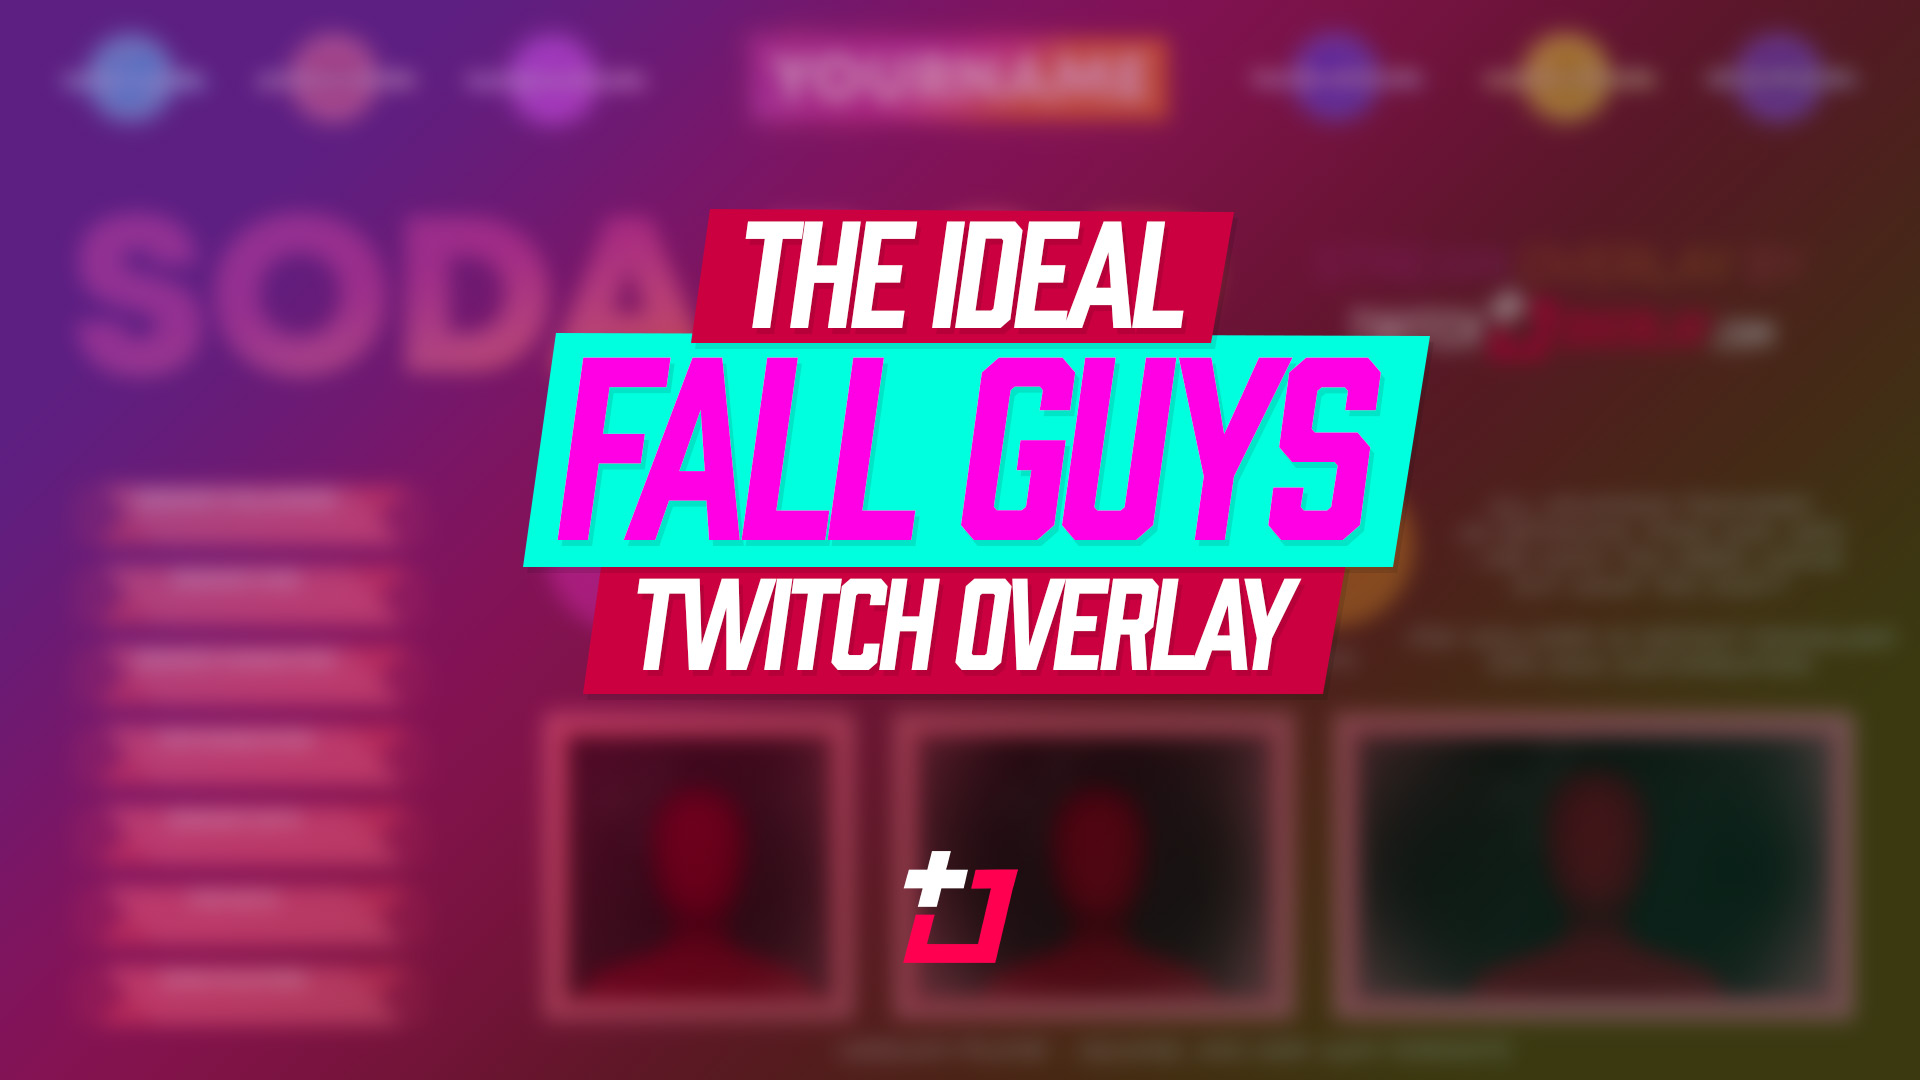 fall guys twitch overlay | Twitch Overlay